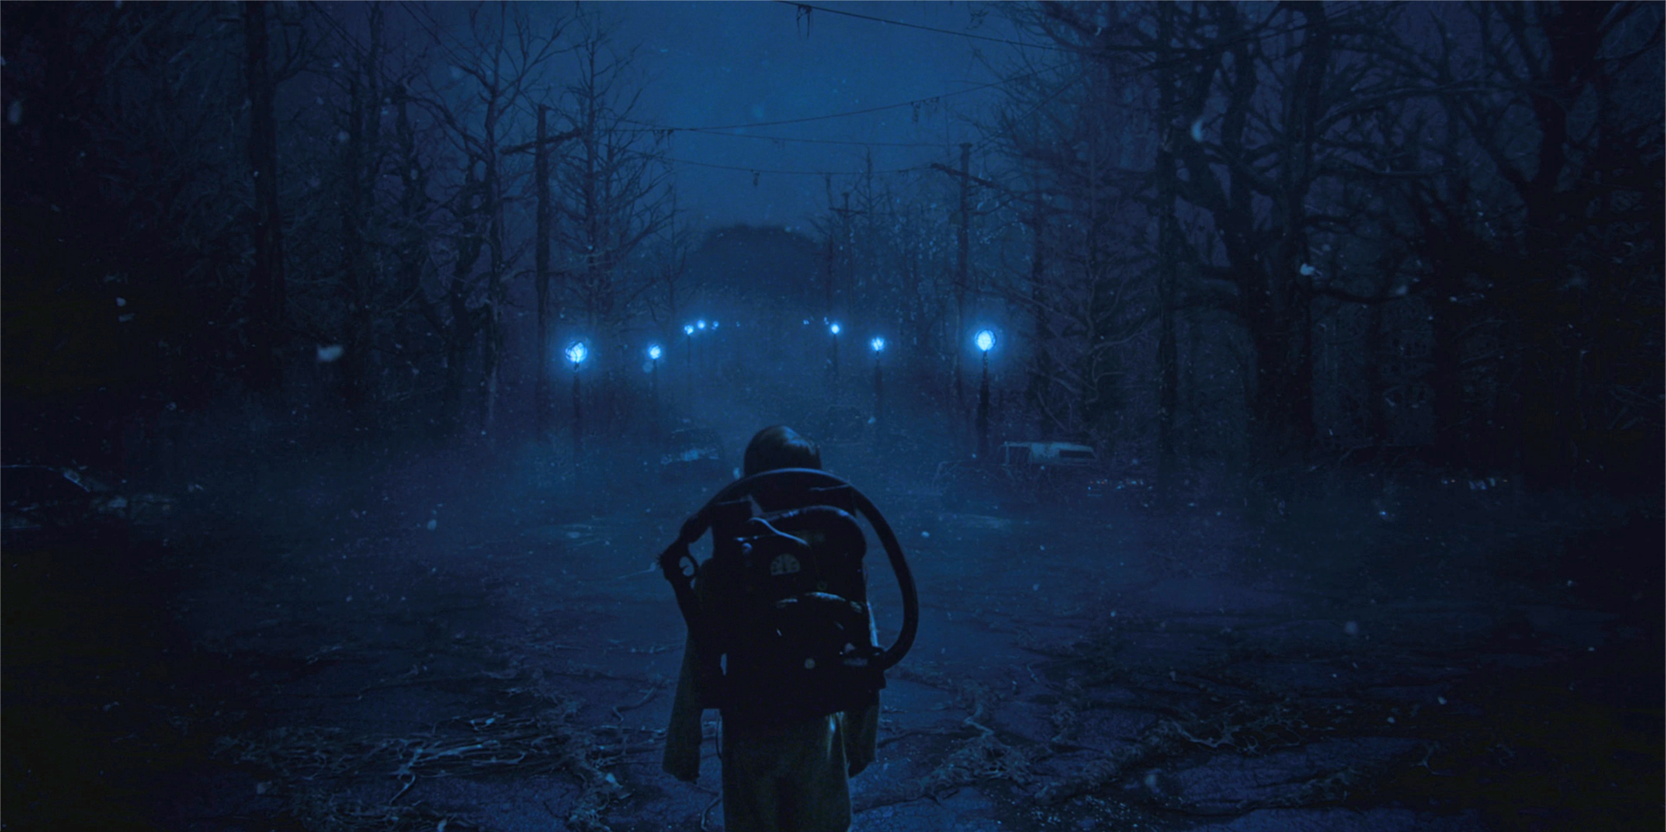 Stranger Things explained: How long was Will in the Upside Down in